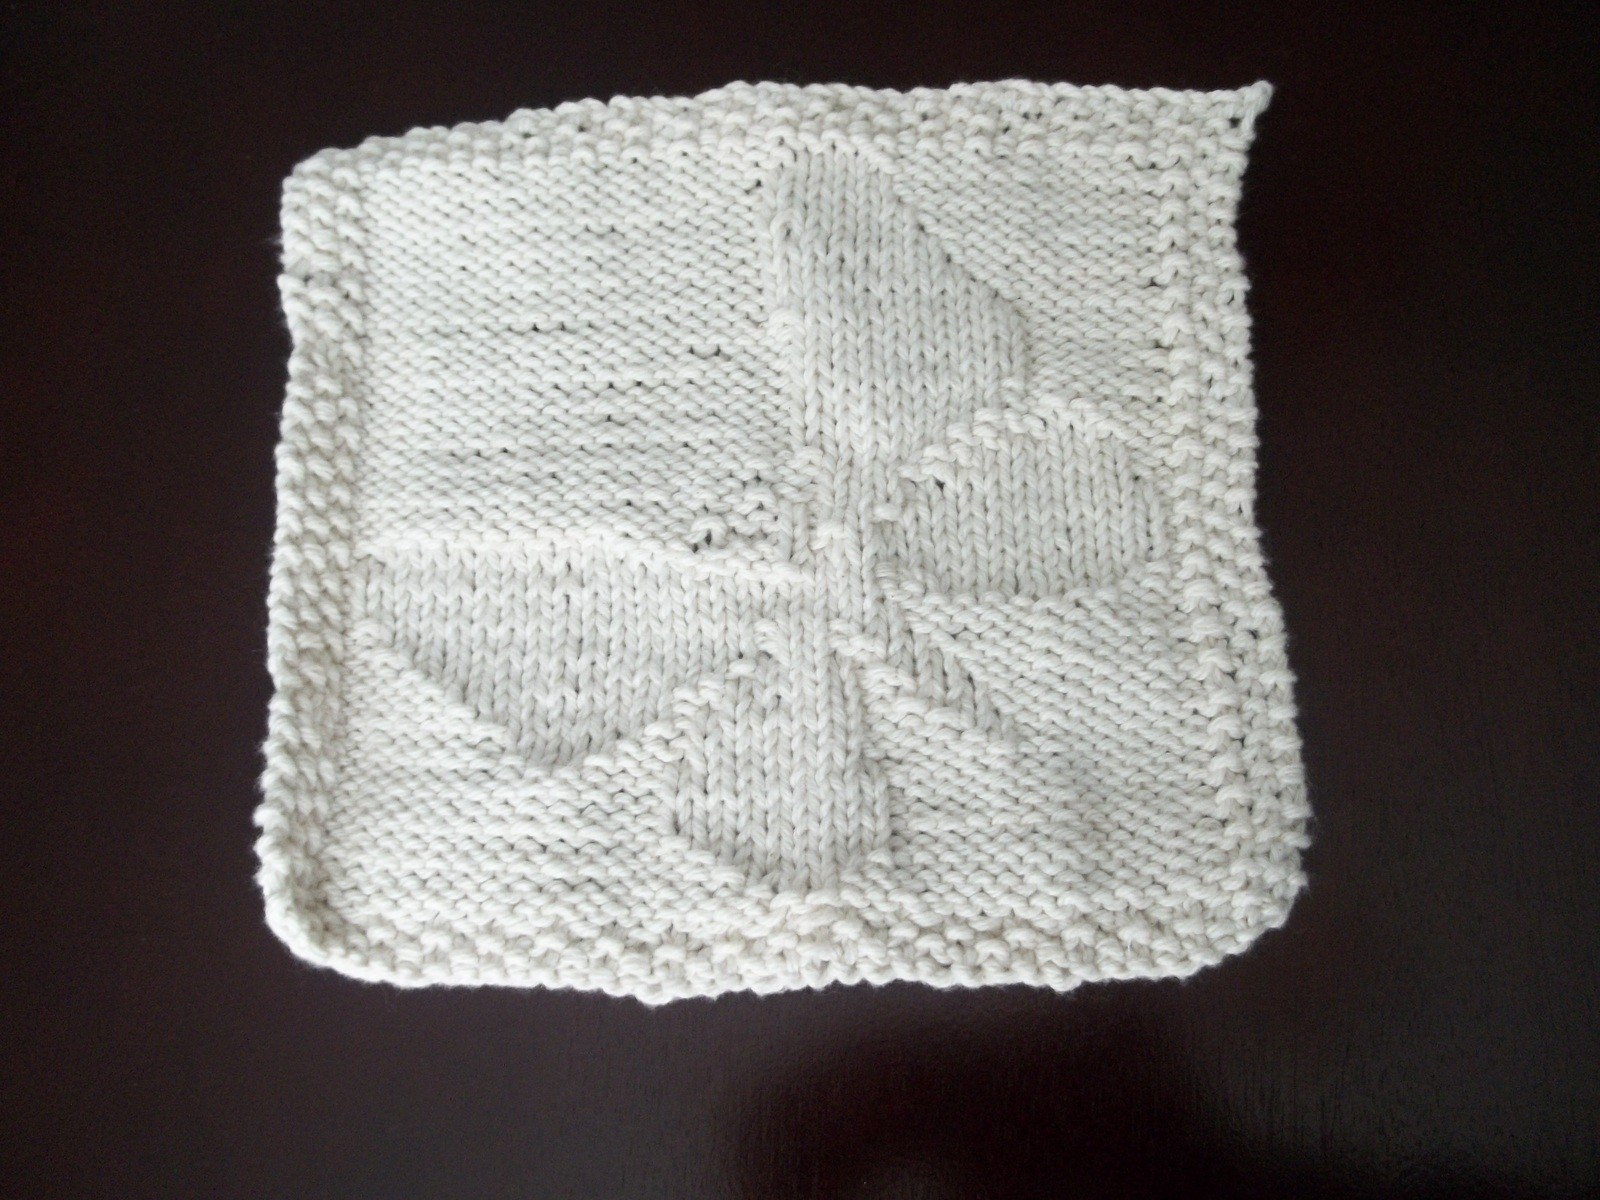 Knitted Butterfly Dishcloth Pattern Butterfly Dishcloth A Dish Cloth Or Scrubber Knitting On Cut Out